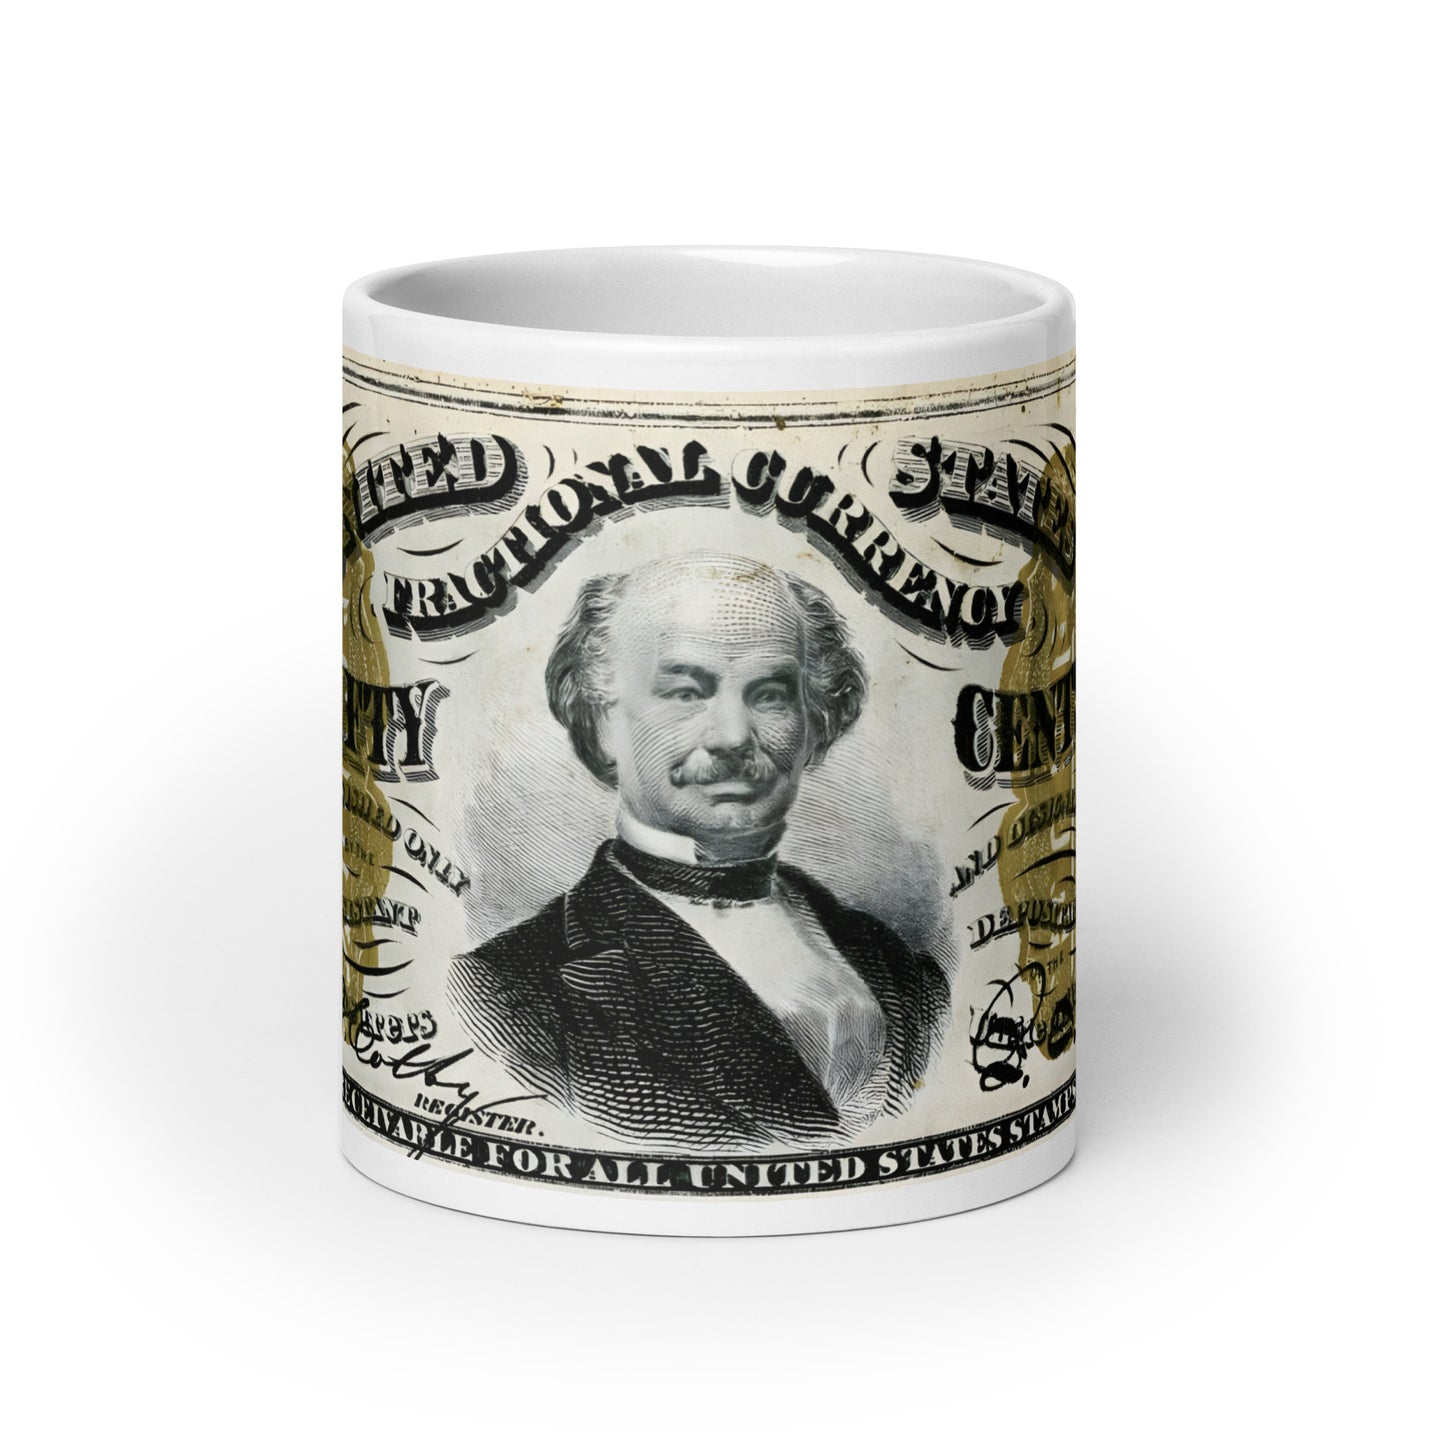 50 Cents 3RD Issue Fractional Currency (Francis Spinner) Edition - Classic Currency Collector's Mug